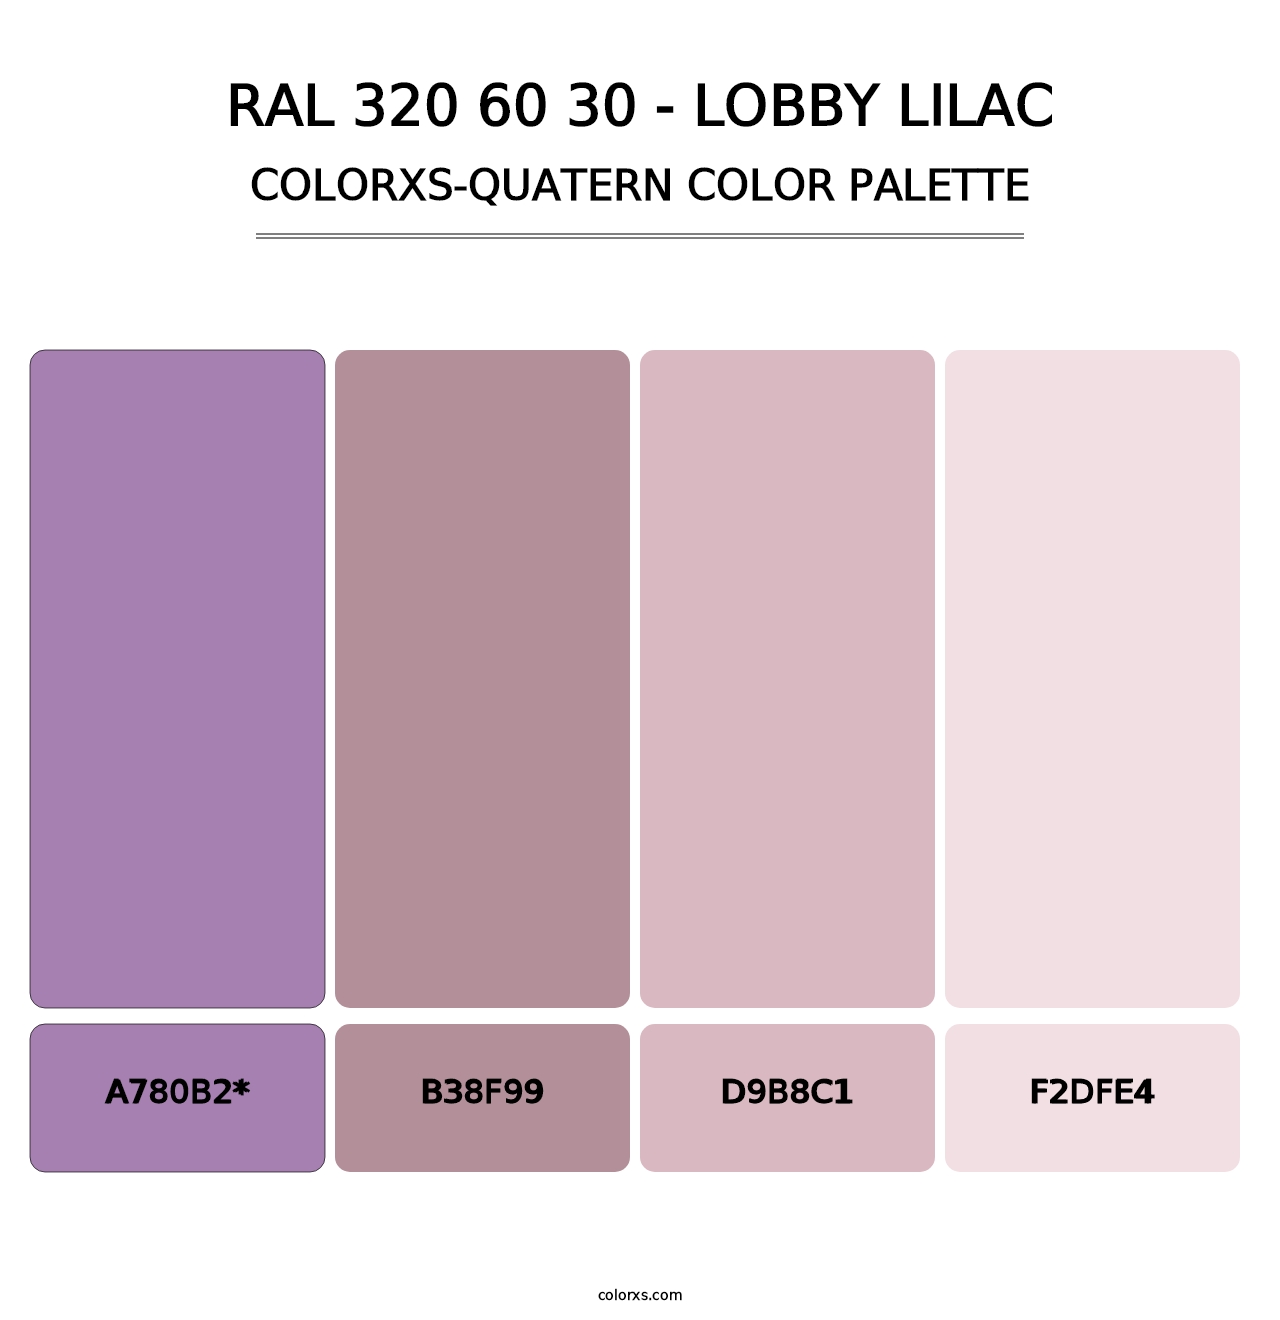 RAL 320 60 30 - Lobby Lilac - Colorxs Quatern Palette